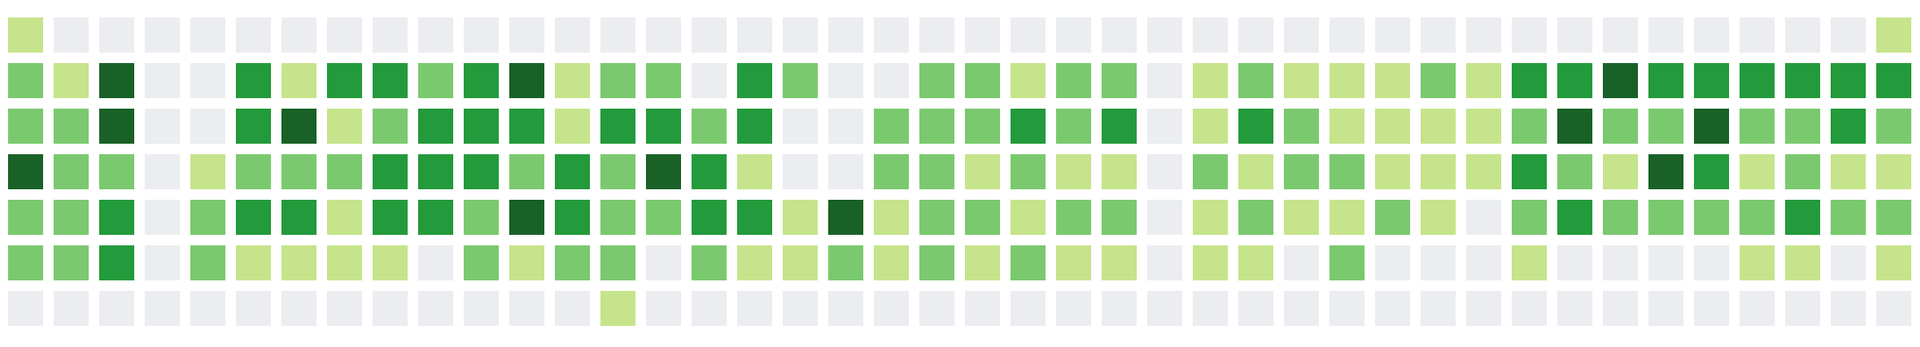 What I see in Github contributions